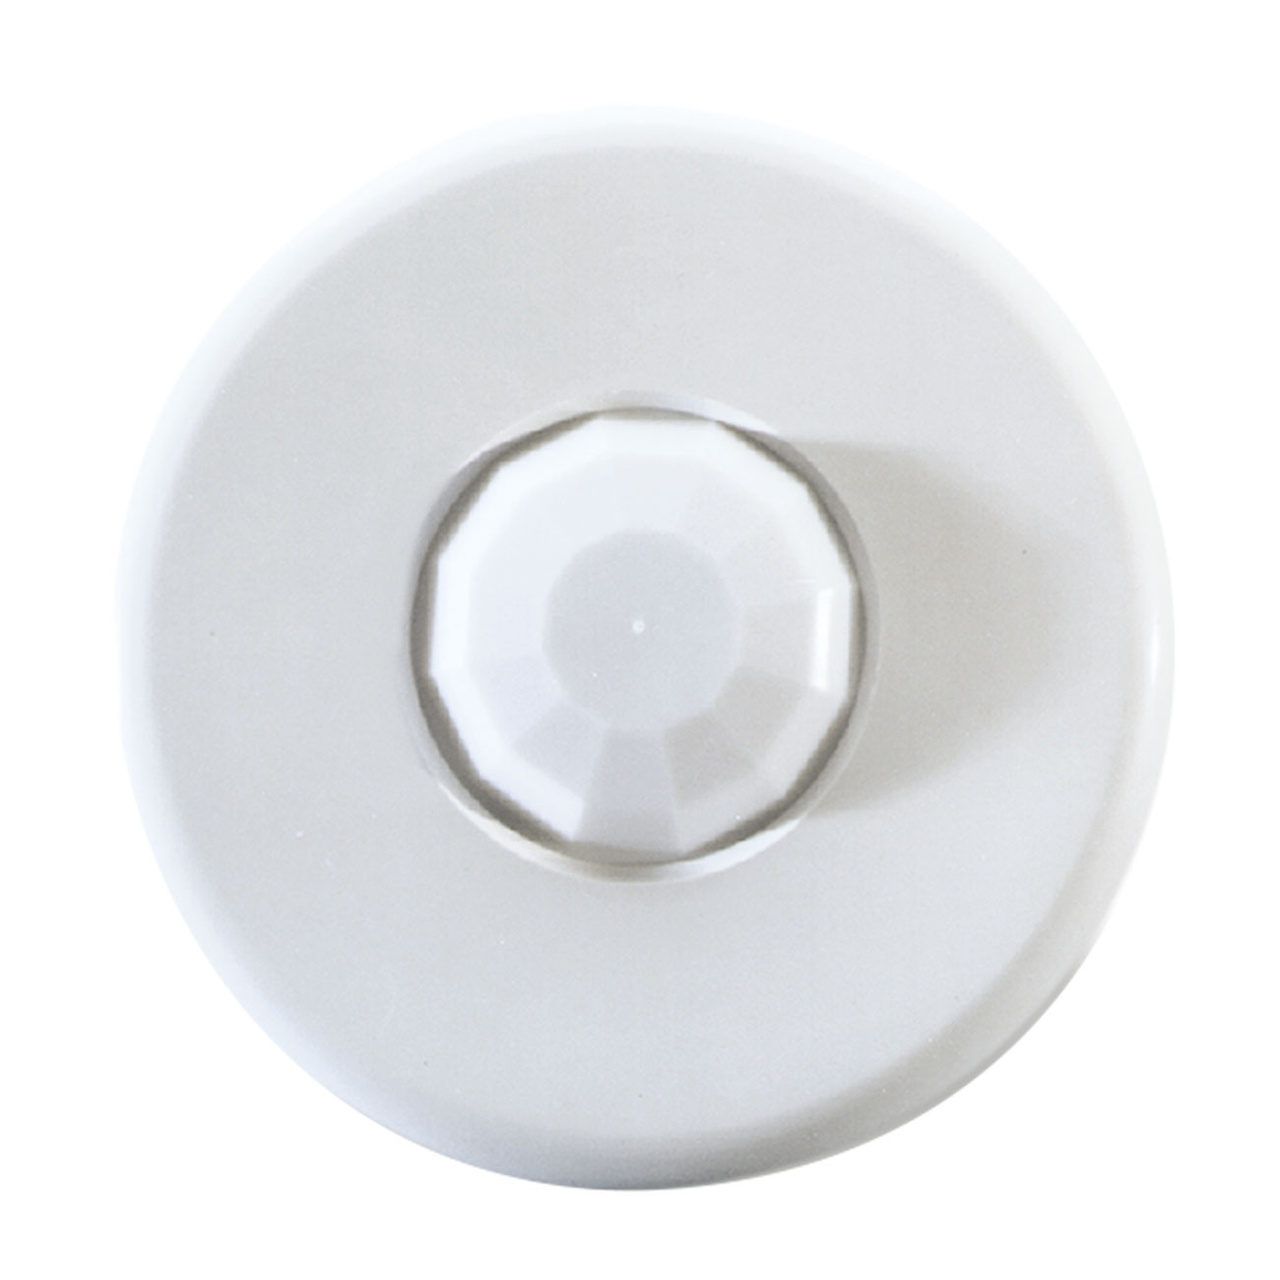 This passive infrared (PIR) Ceiling Sensor provides 360° coverage to detect occupancy in the controlled area. These low profile sensors reliably control lighting in a variety of applications.  Up to 500 sq feet coverage.  With isolated relay and light level.